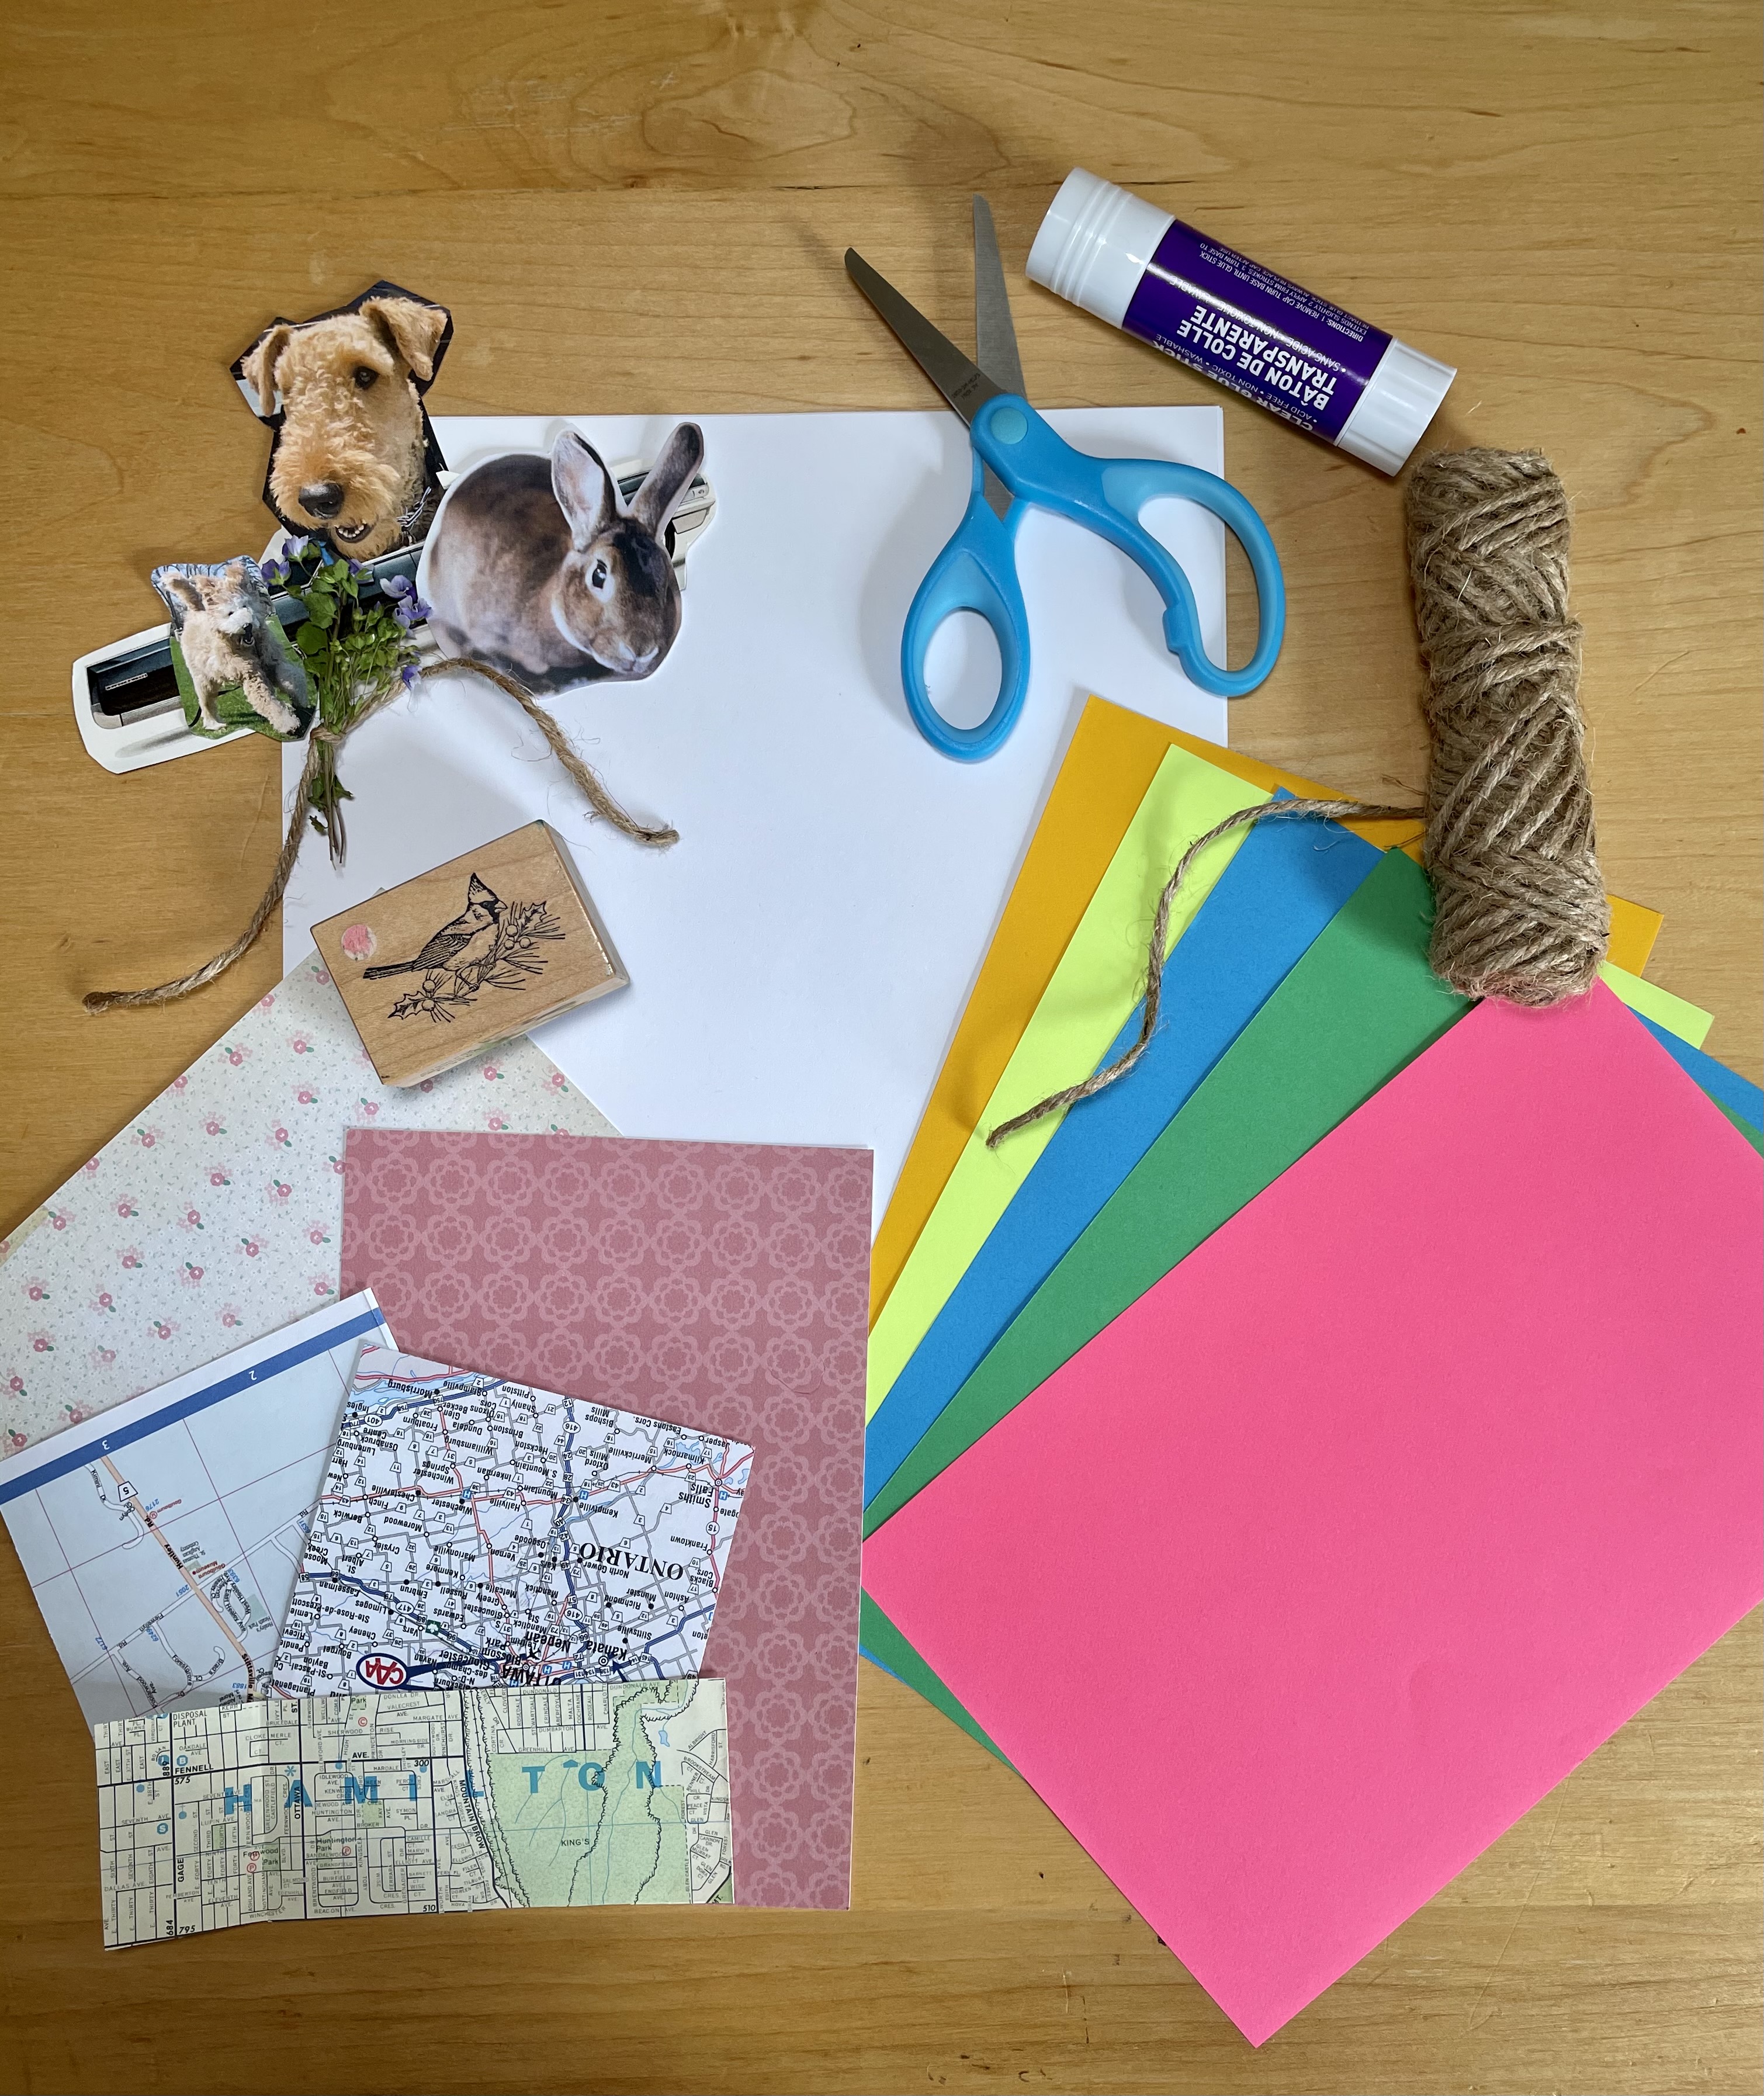 A display of collage materials including coloured and patterned paper, cut-out images of animals, a rubber stamp, scissors, glue and string